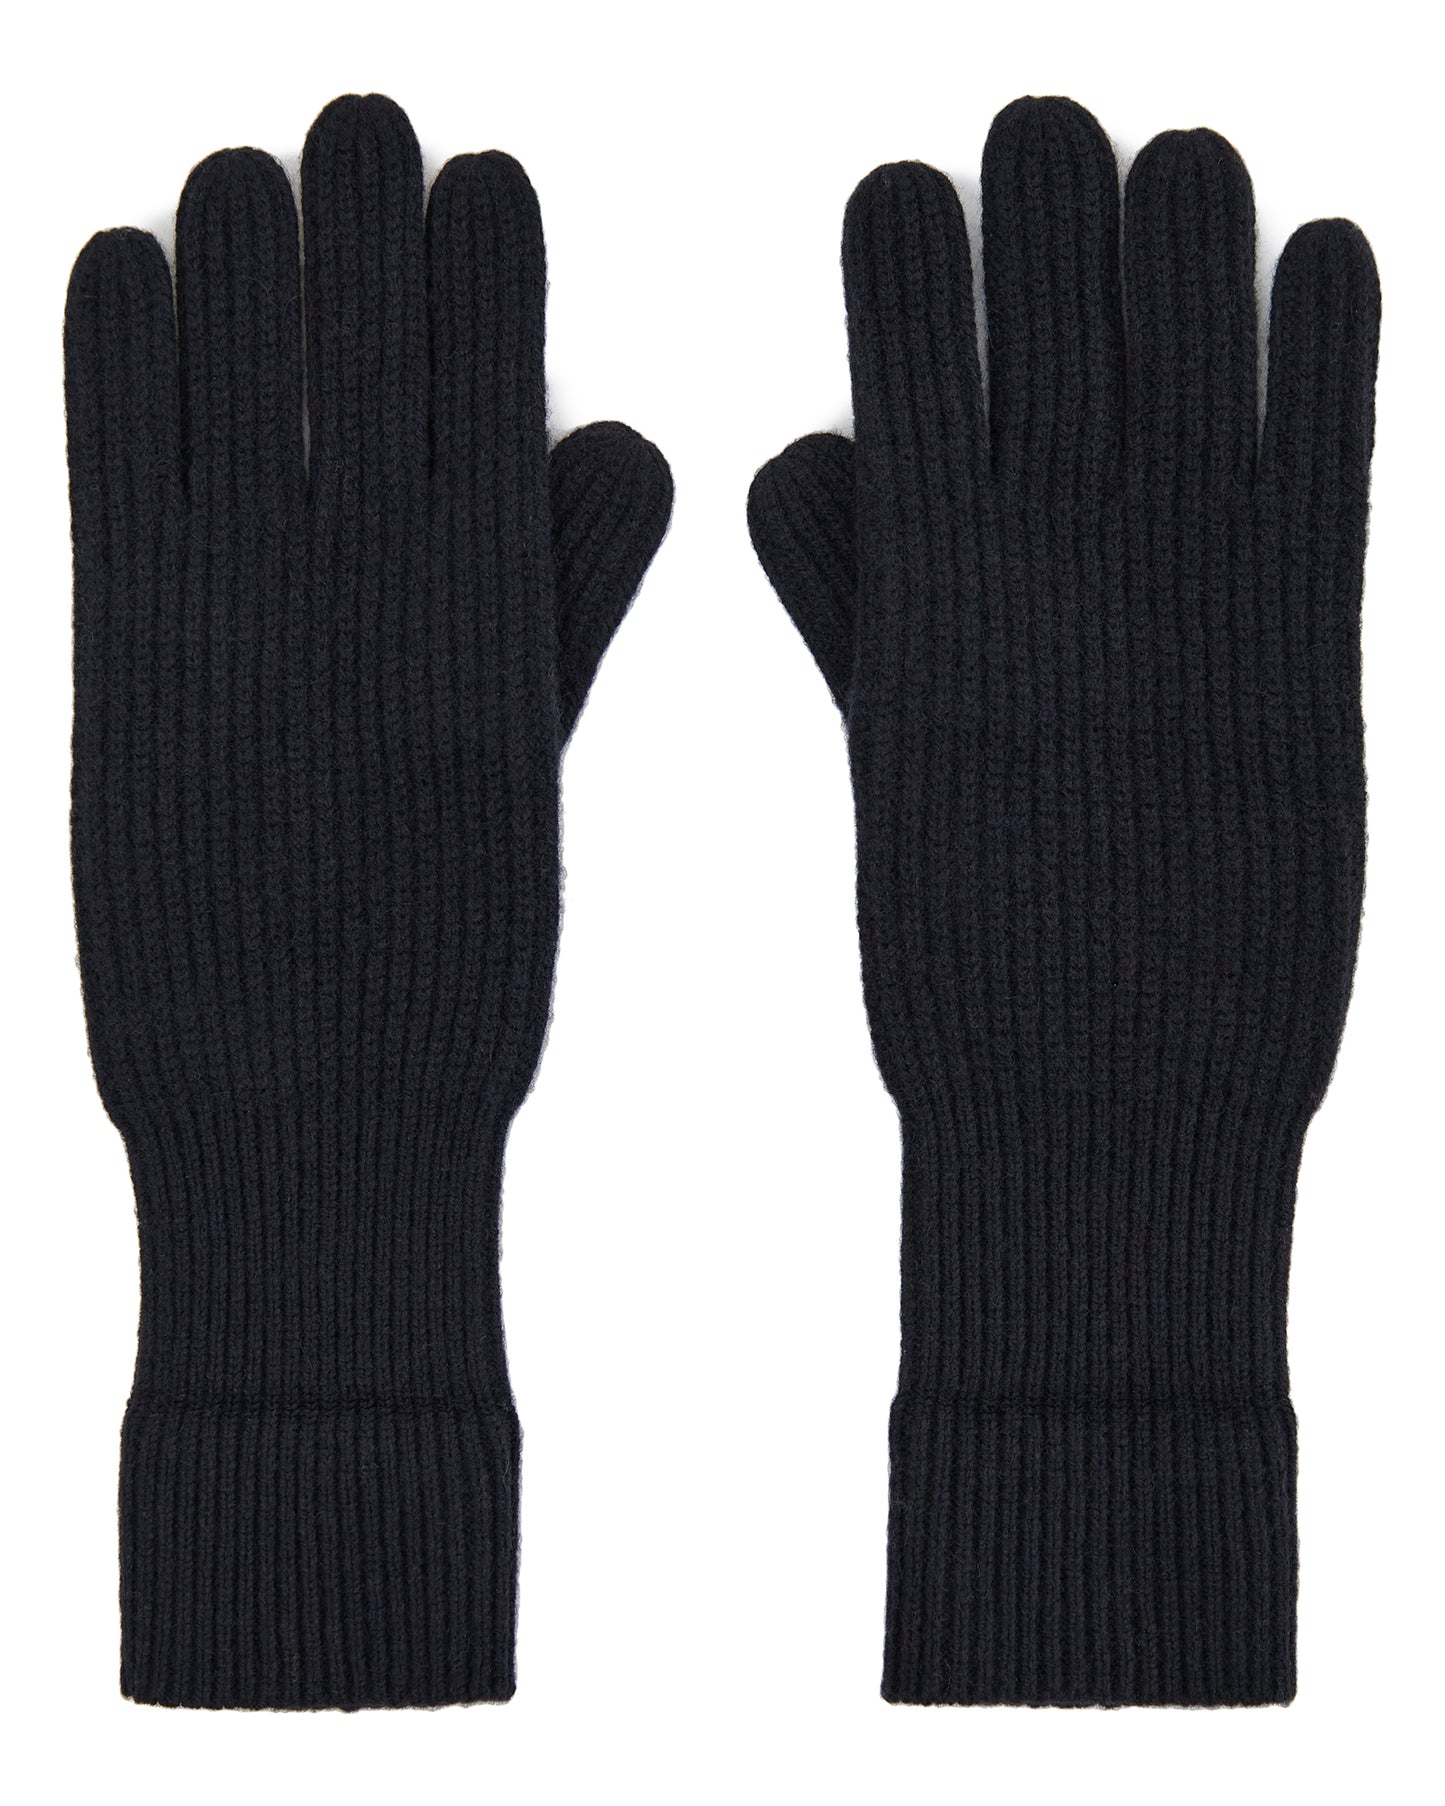 Andy cashmere gloves